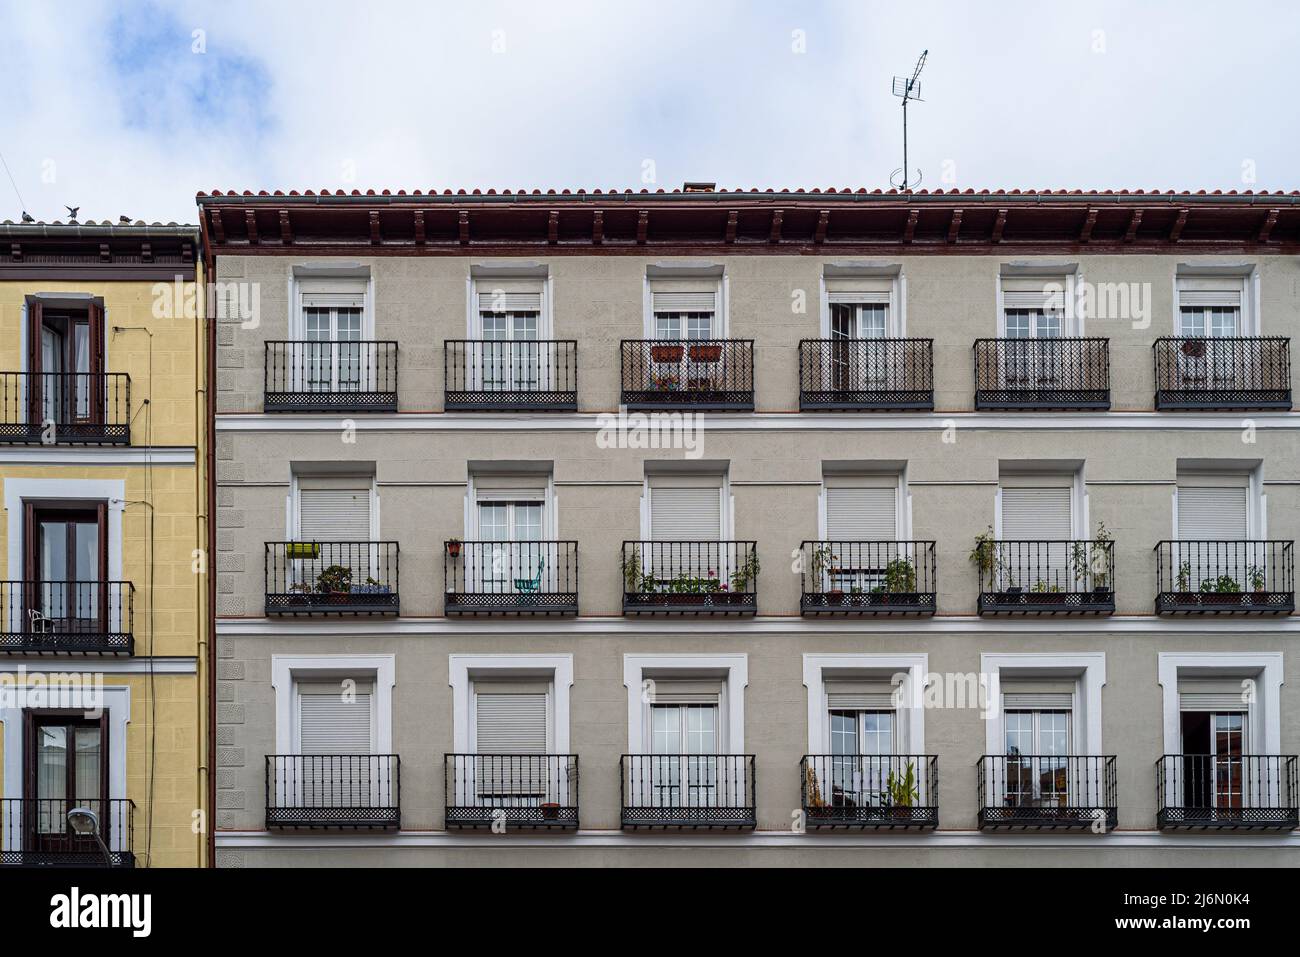 Low angle view of old residential buildings in Lavapies neighborhood in central Madrid. Stock Photo